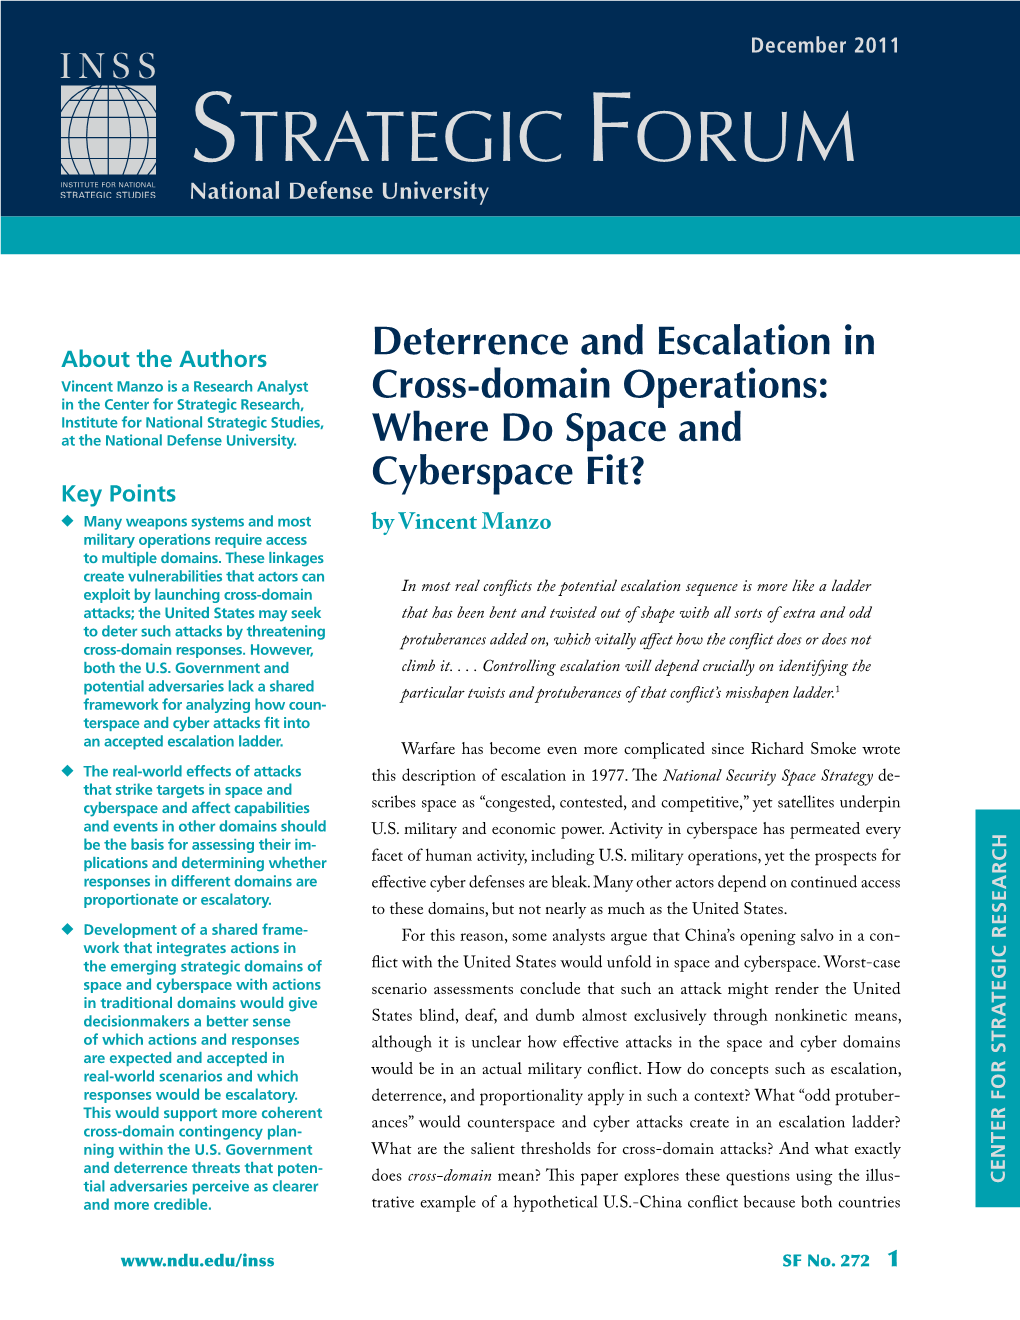 Deterrence and Escalation in Cross-Domain Operations: Where